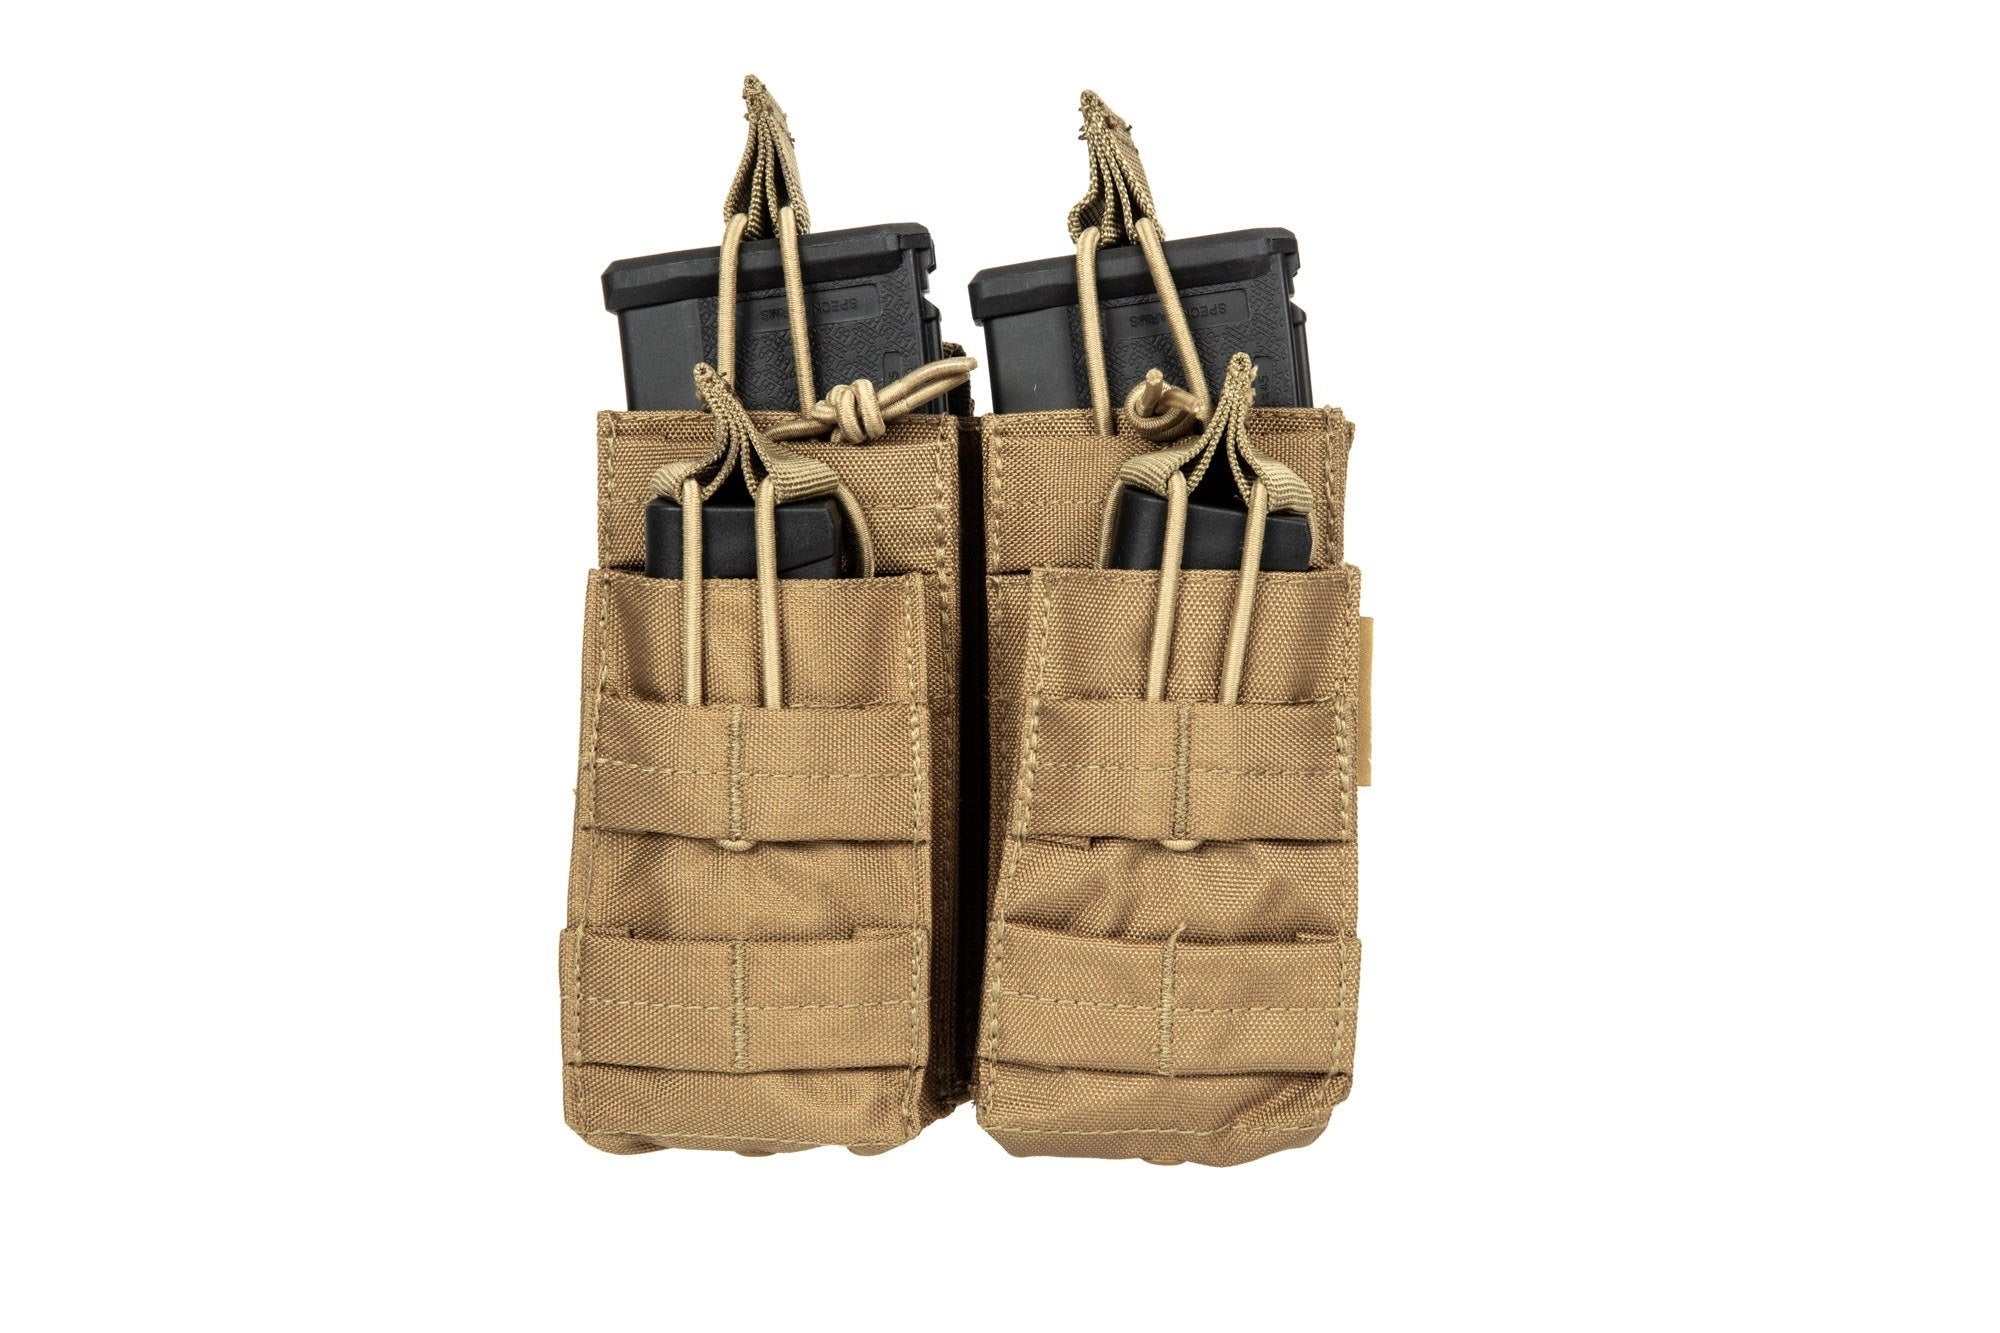 M4/M16 type double magazine pouch - Coyote-1